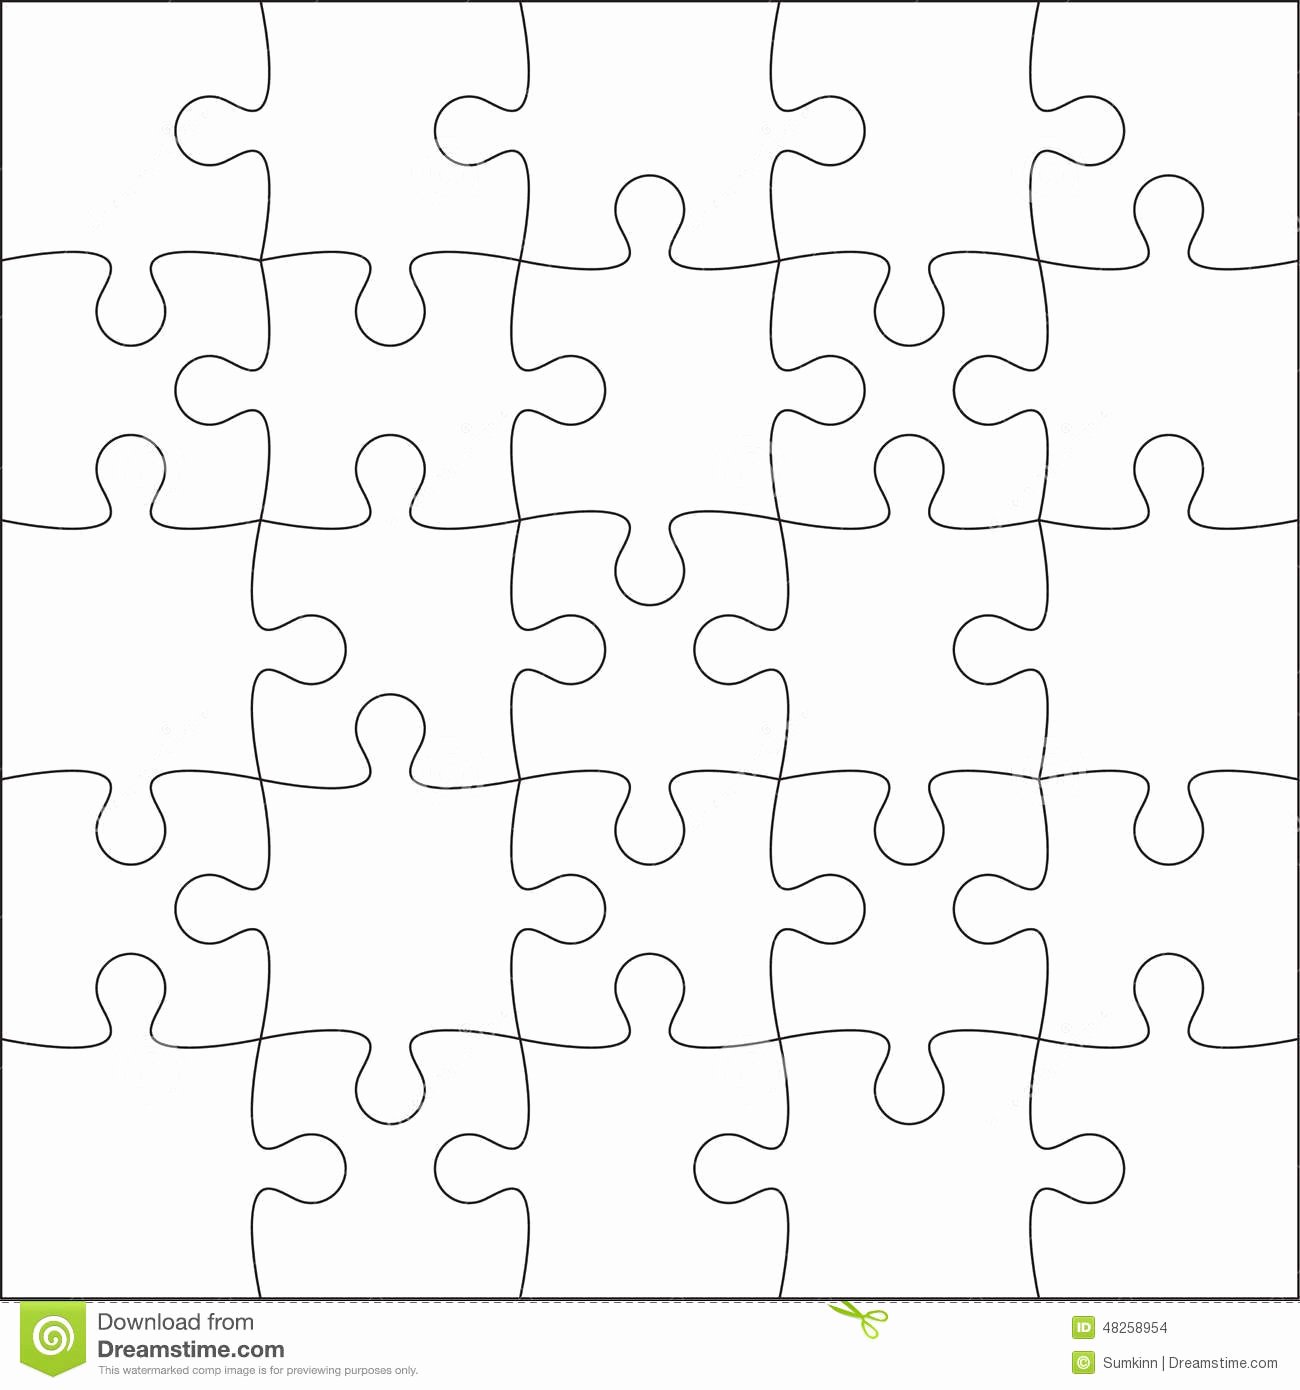 Blank Puzzle Pieces Template Elegant Jigsaw Puzzle Blank Stock Image